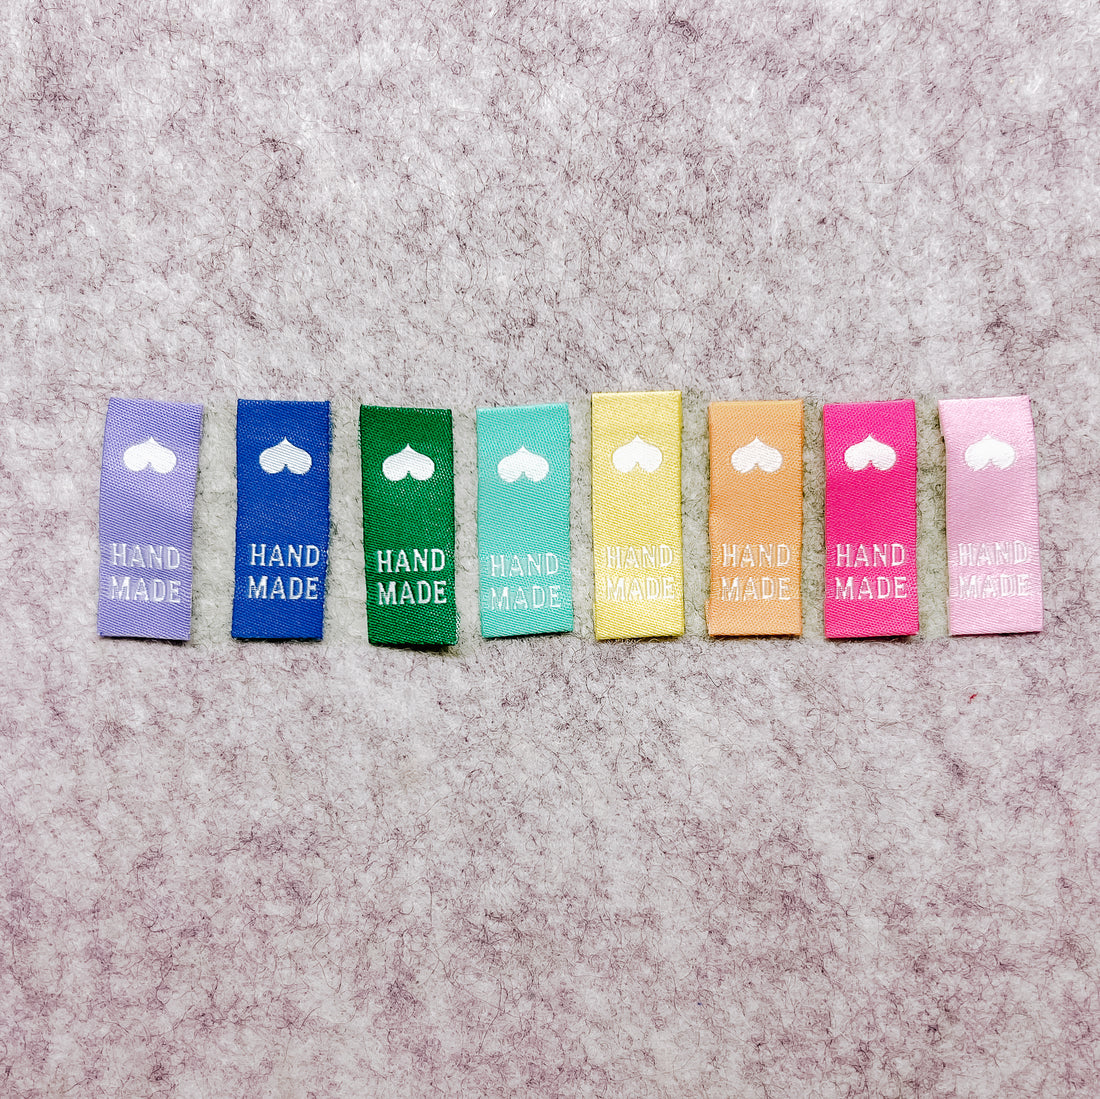 RAINBOW HANDMADE TAGS for Sewing (8)